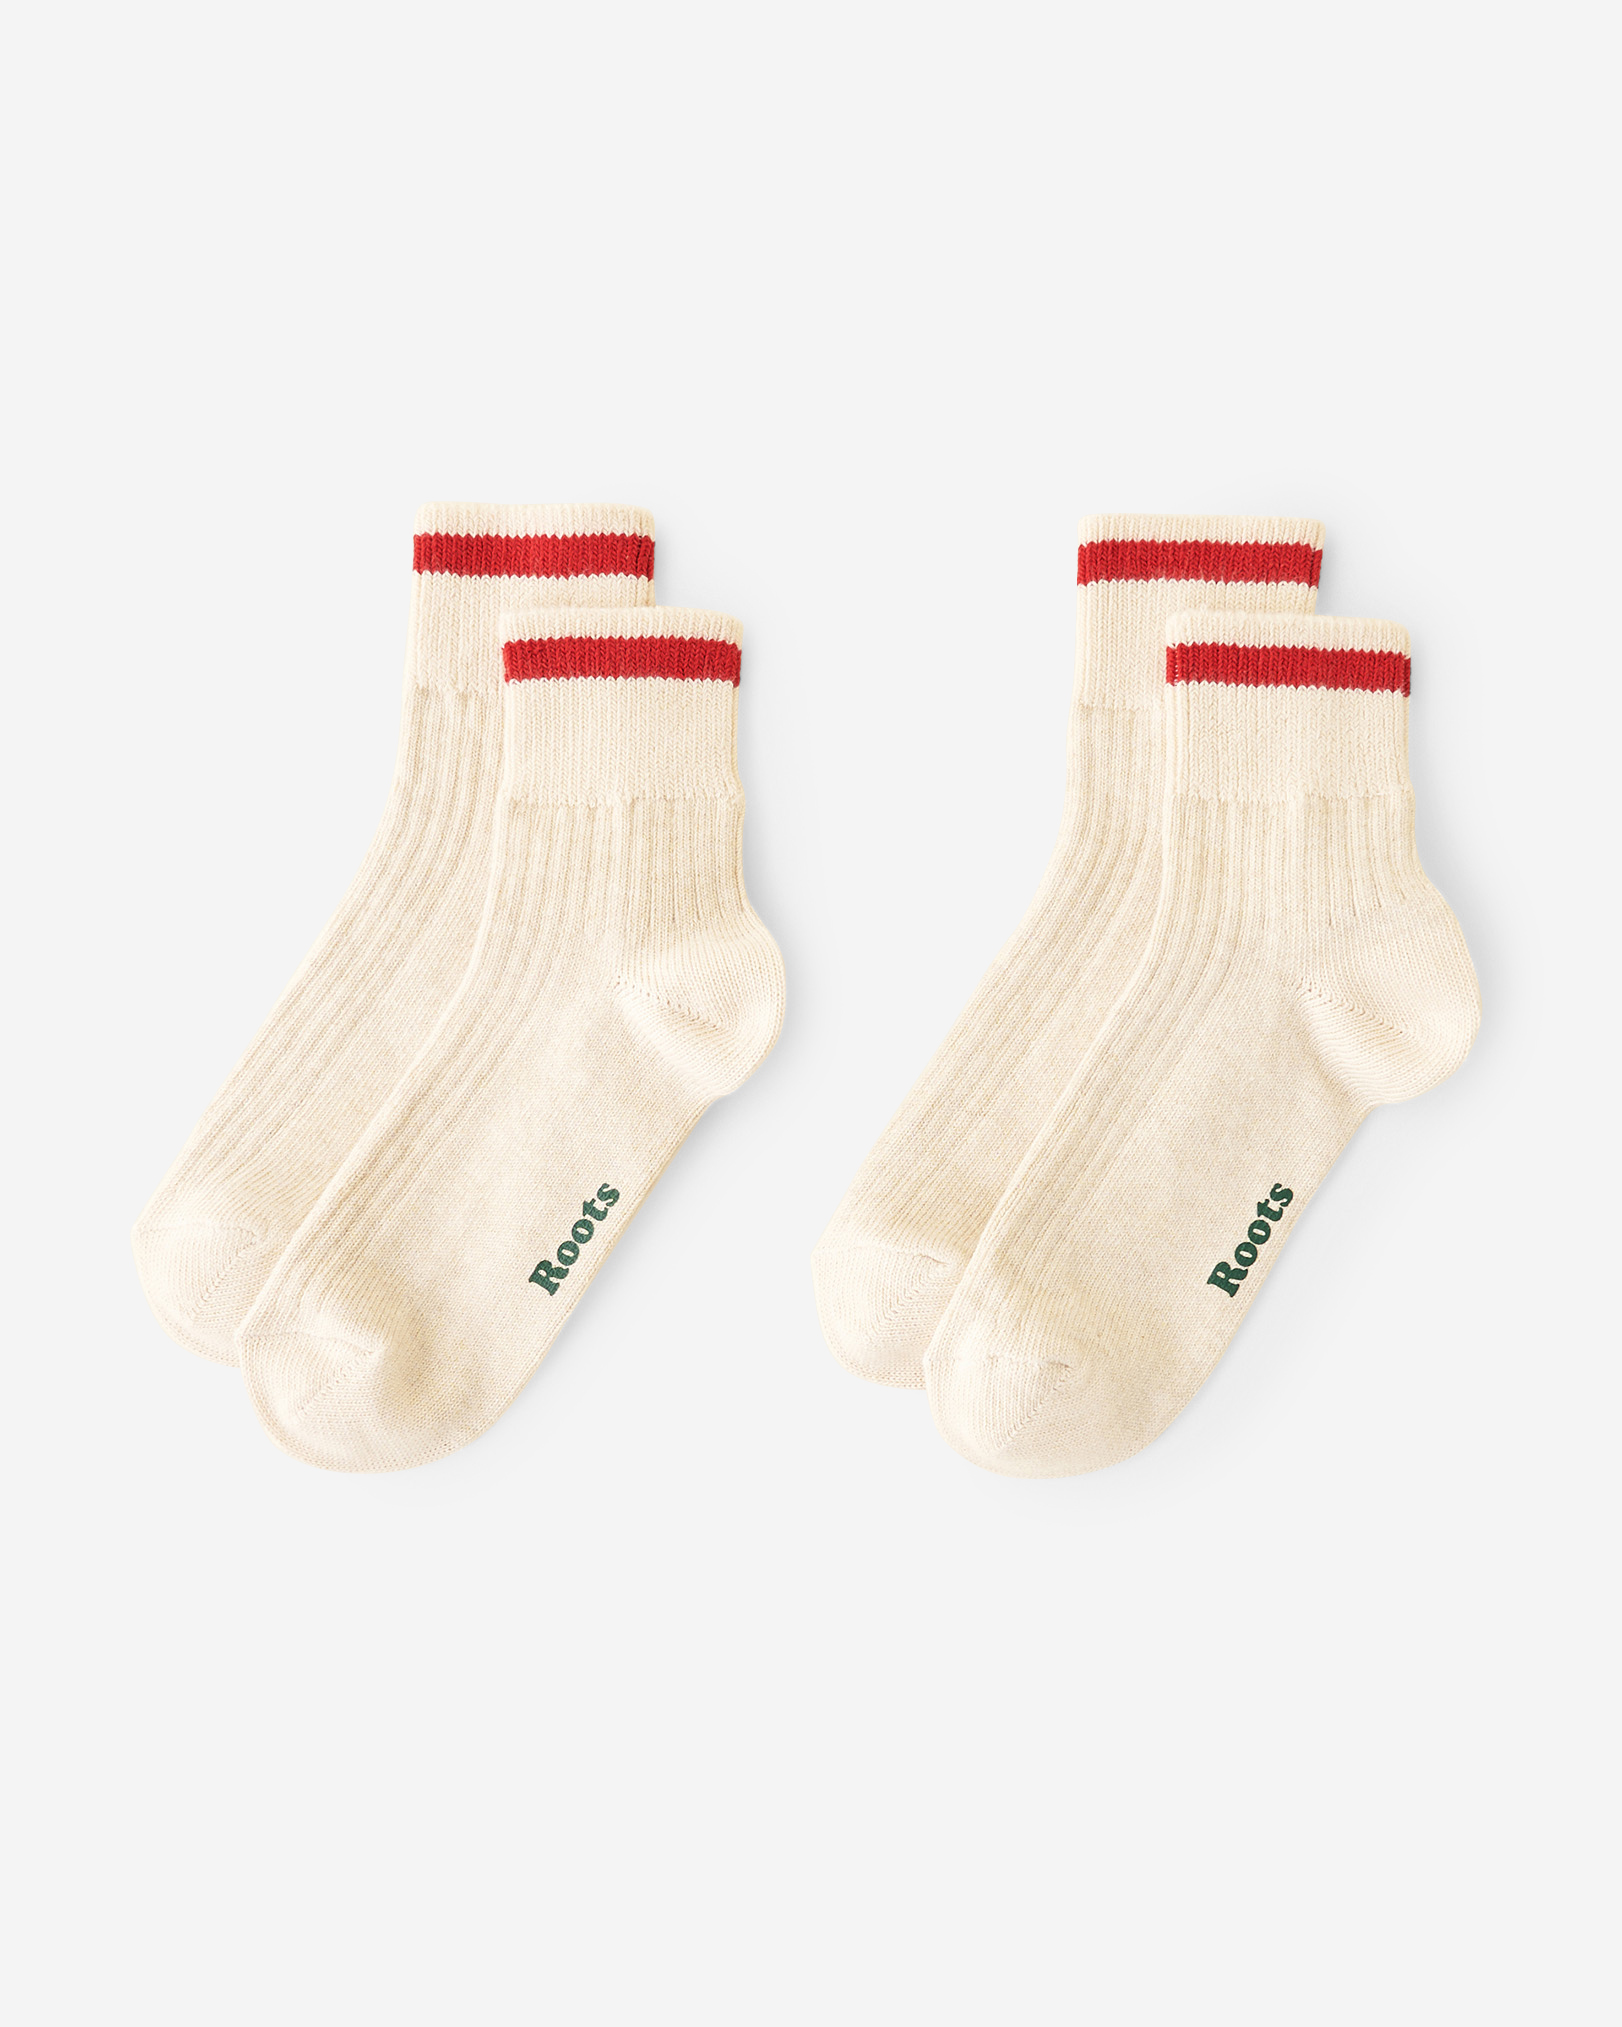 Roots Adult Cotton Cabin Ankle Sock 2 Pack in Oatmeal Mix